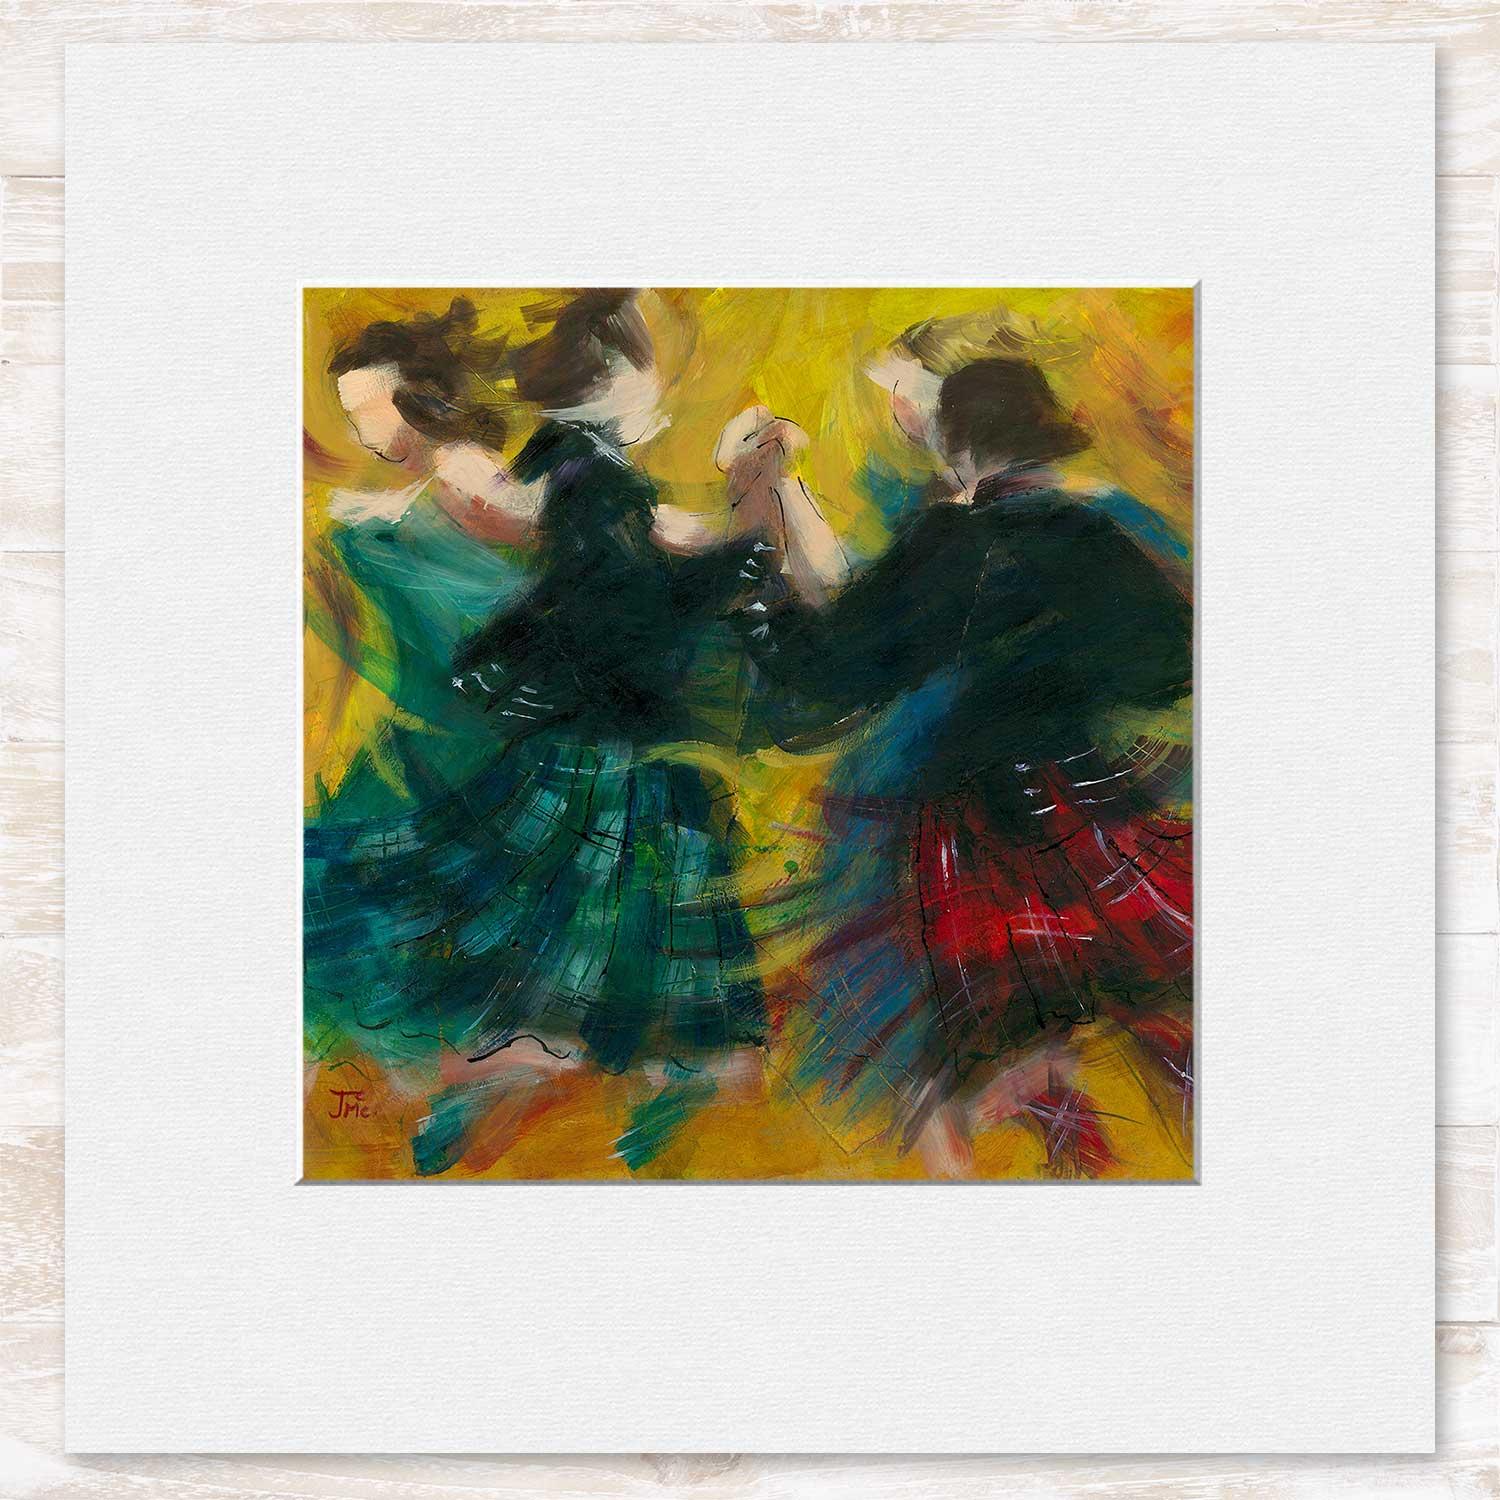 Spinning 4 Mounted Card from an original painting by artist Janet McCrorie